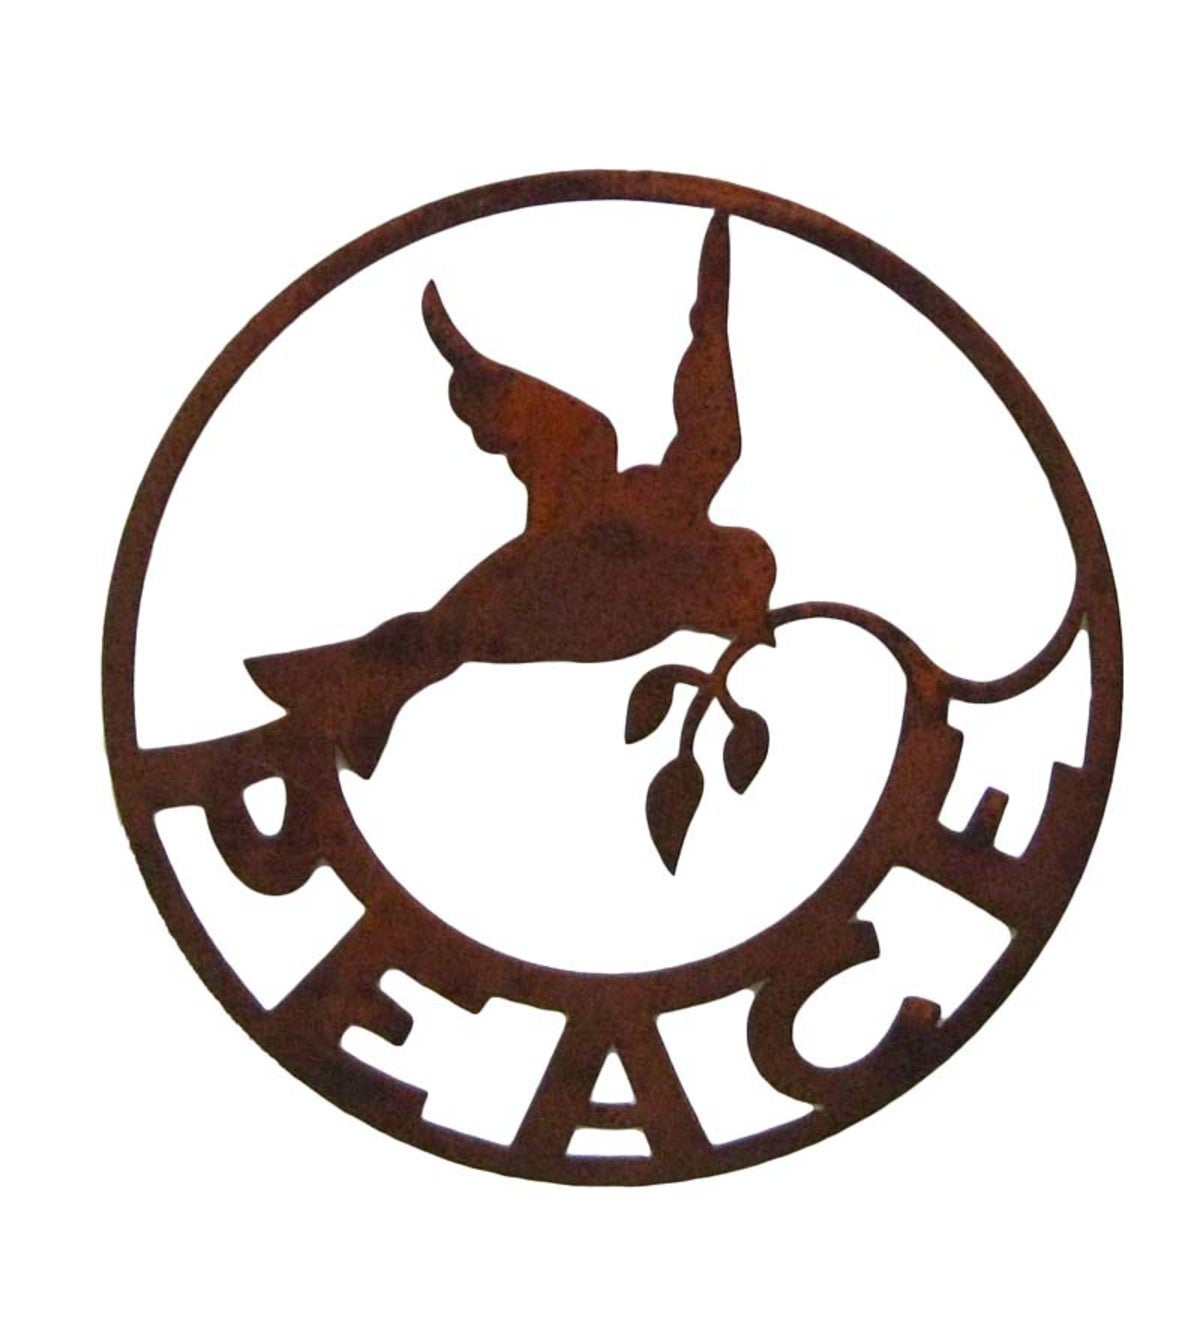 Handcrafted Metal Peace Wall Art